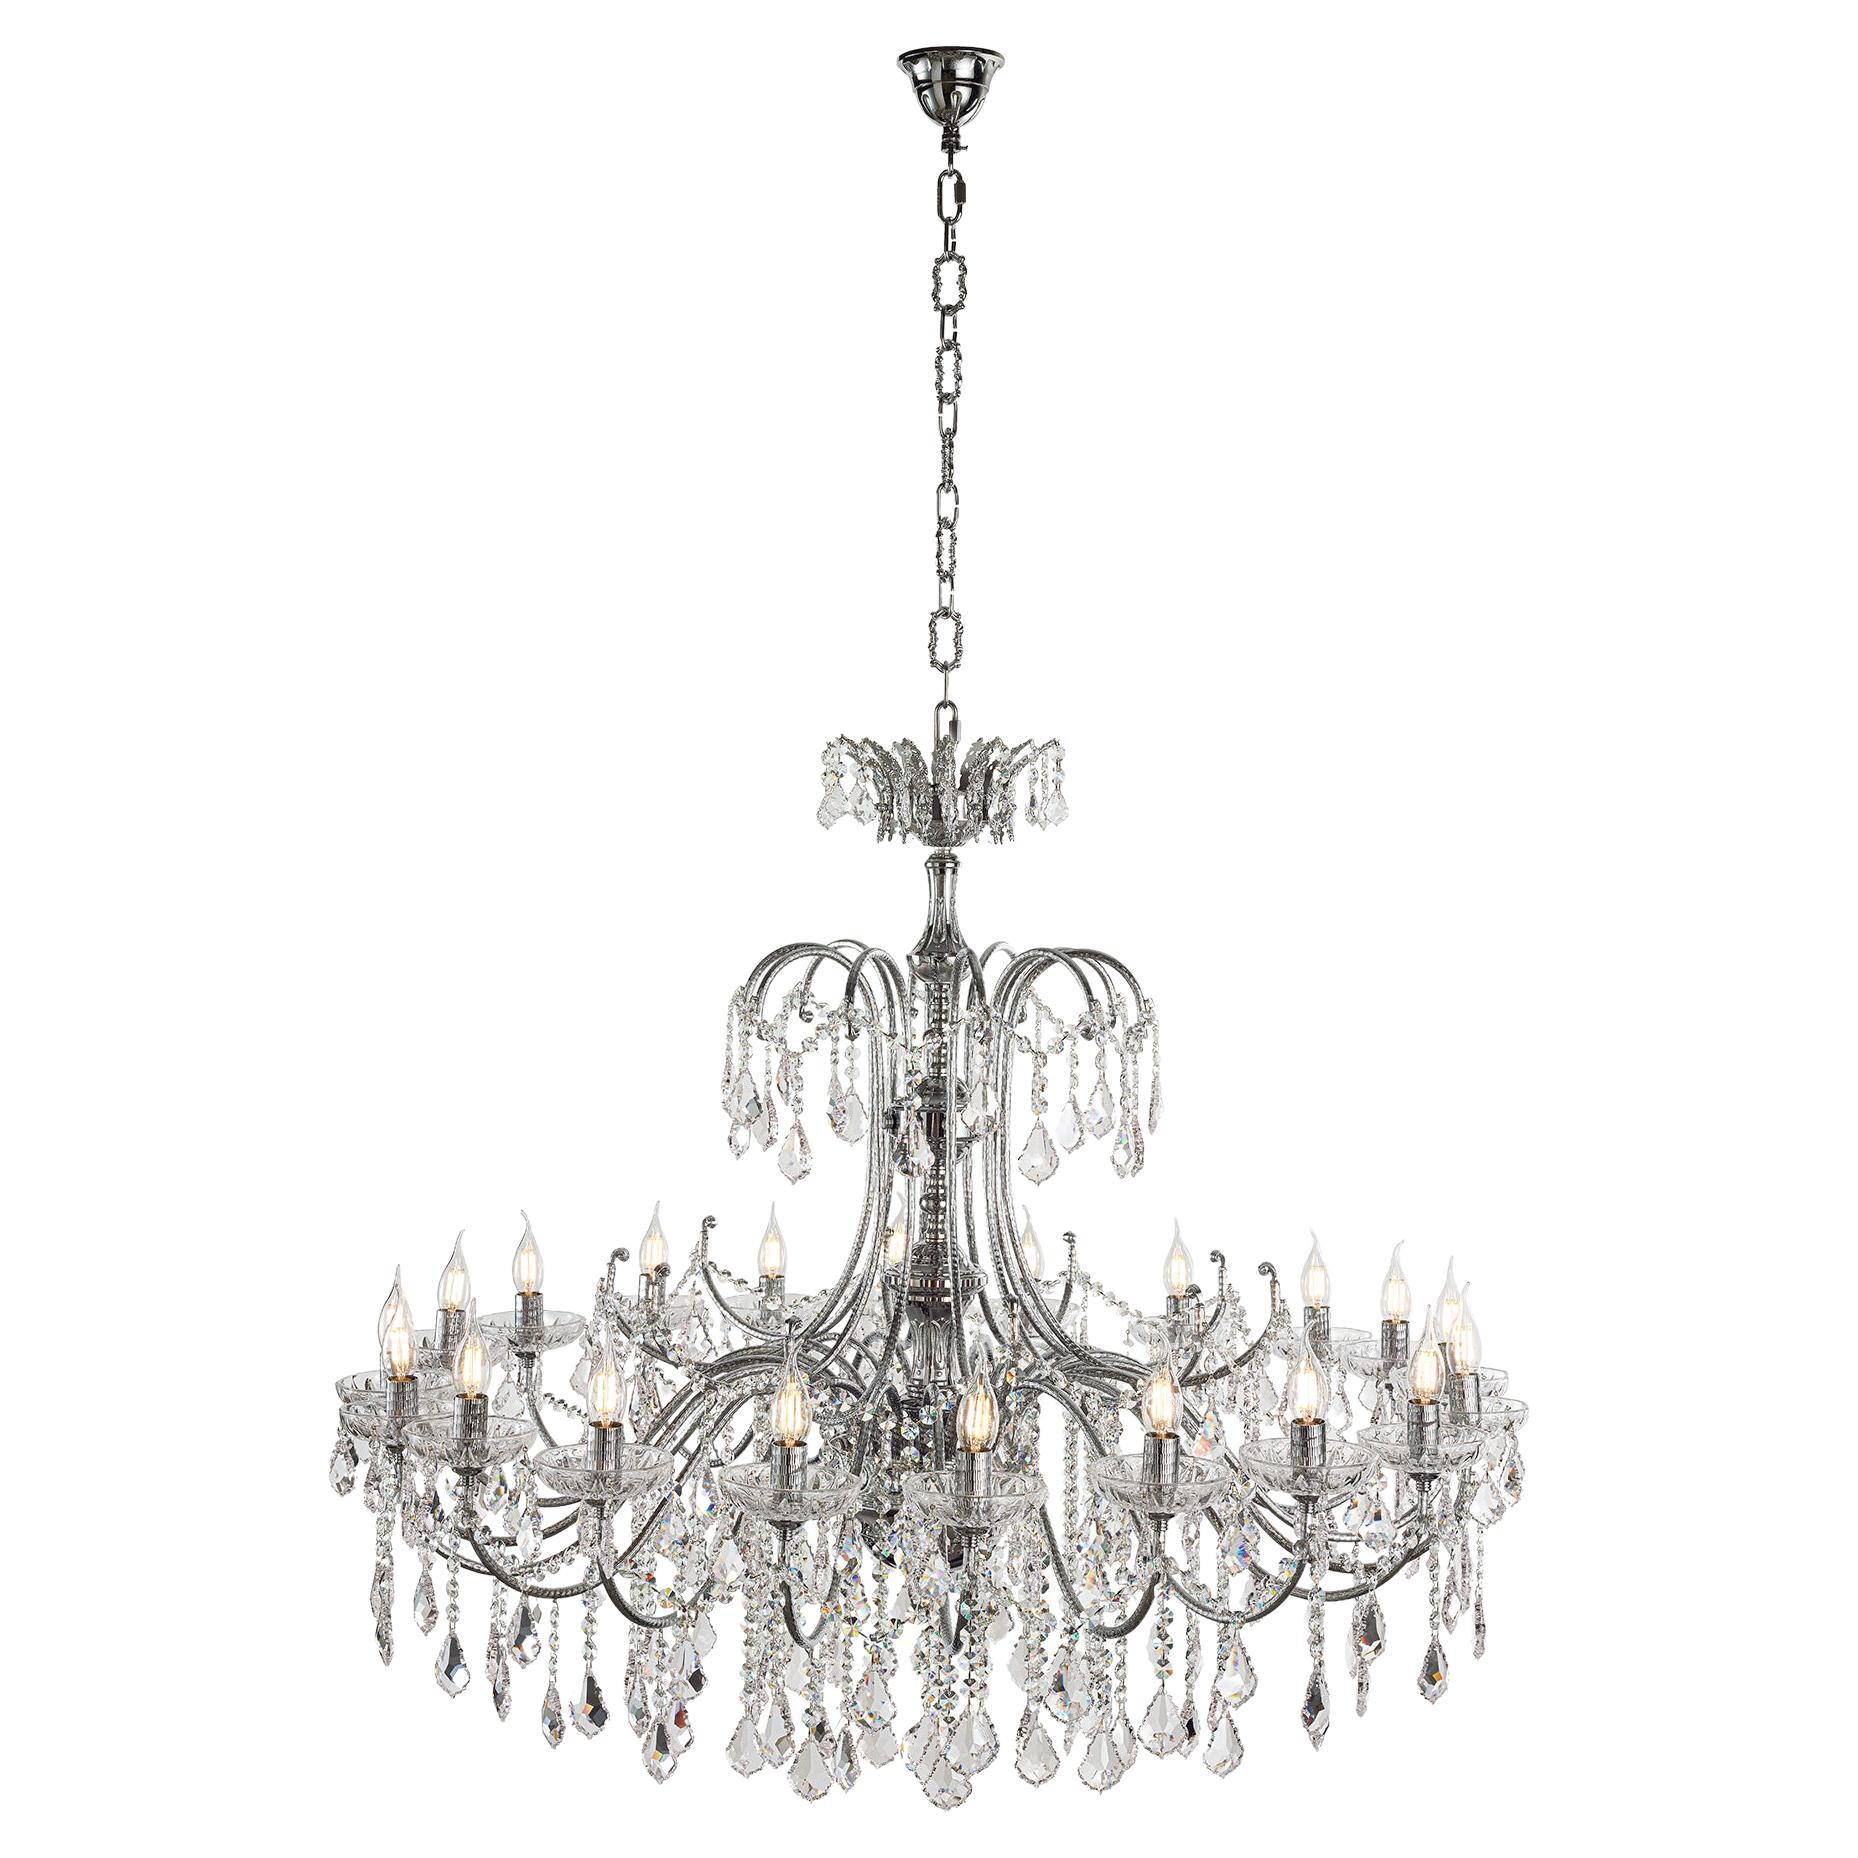 20 Lights Chandelier in Polished Chrome Finish by Modenese Gastone For Sale